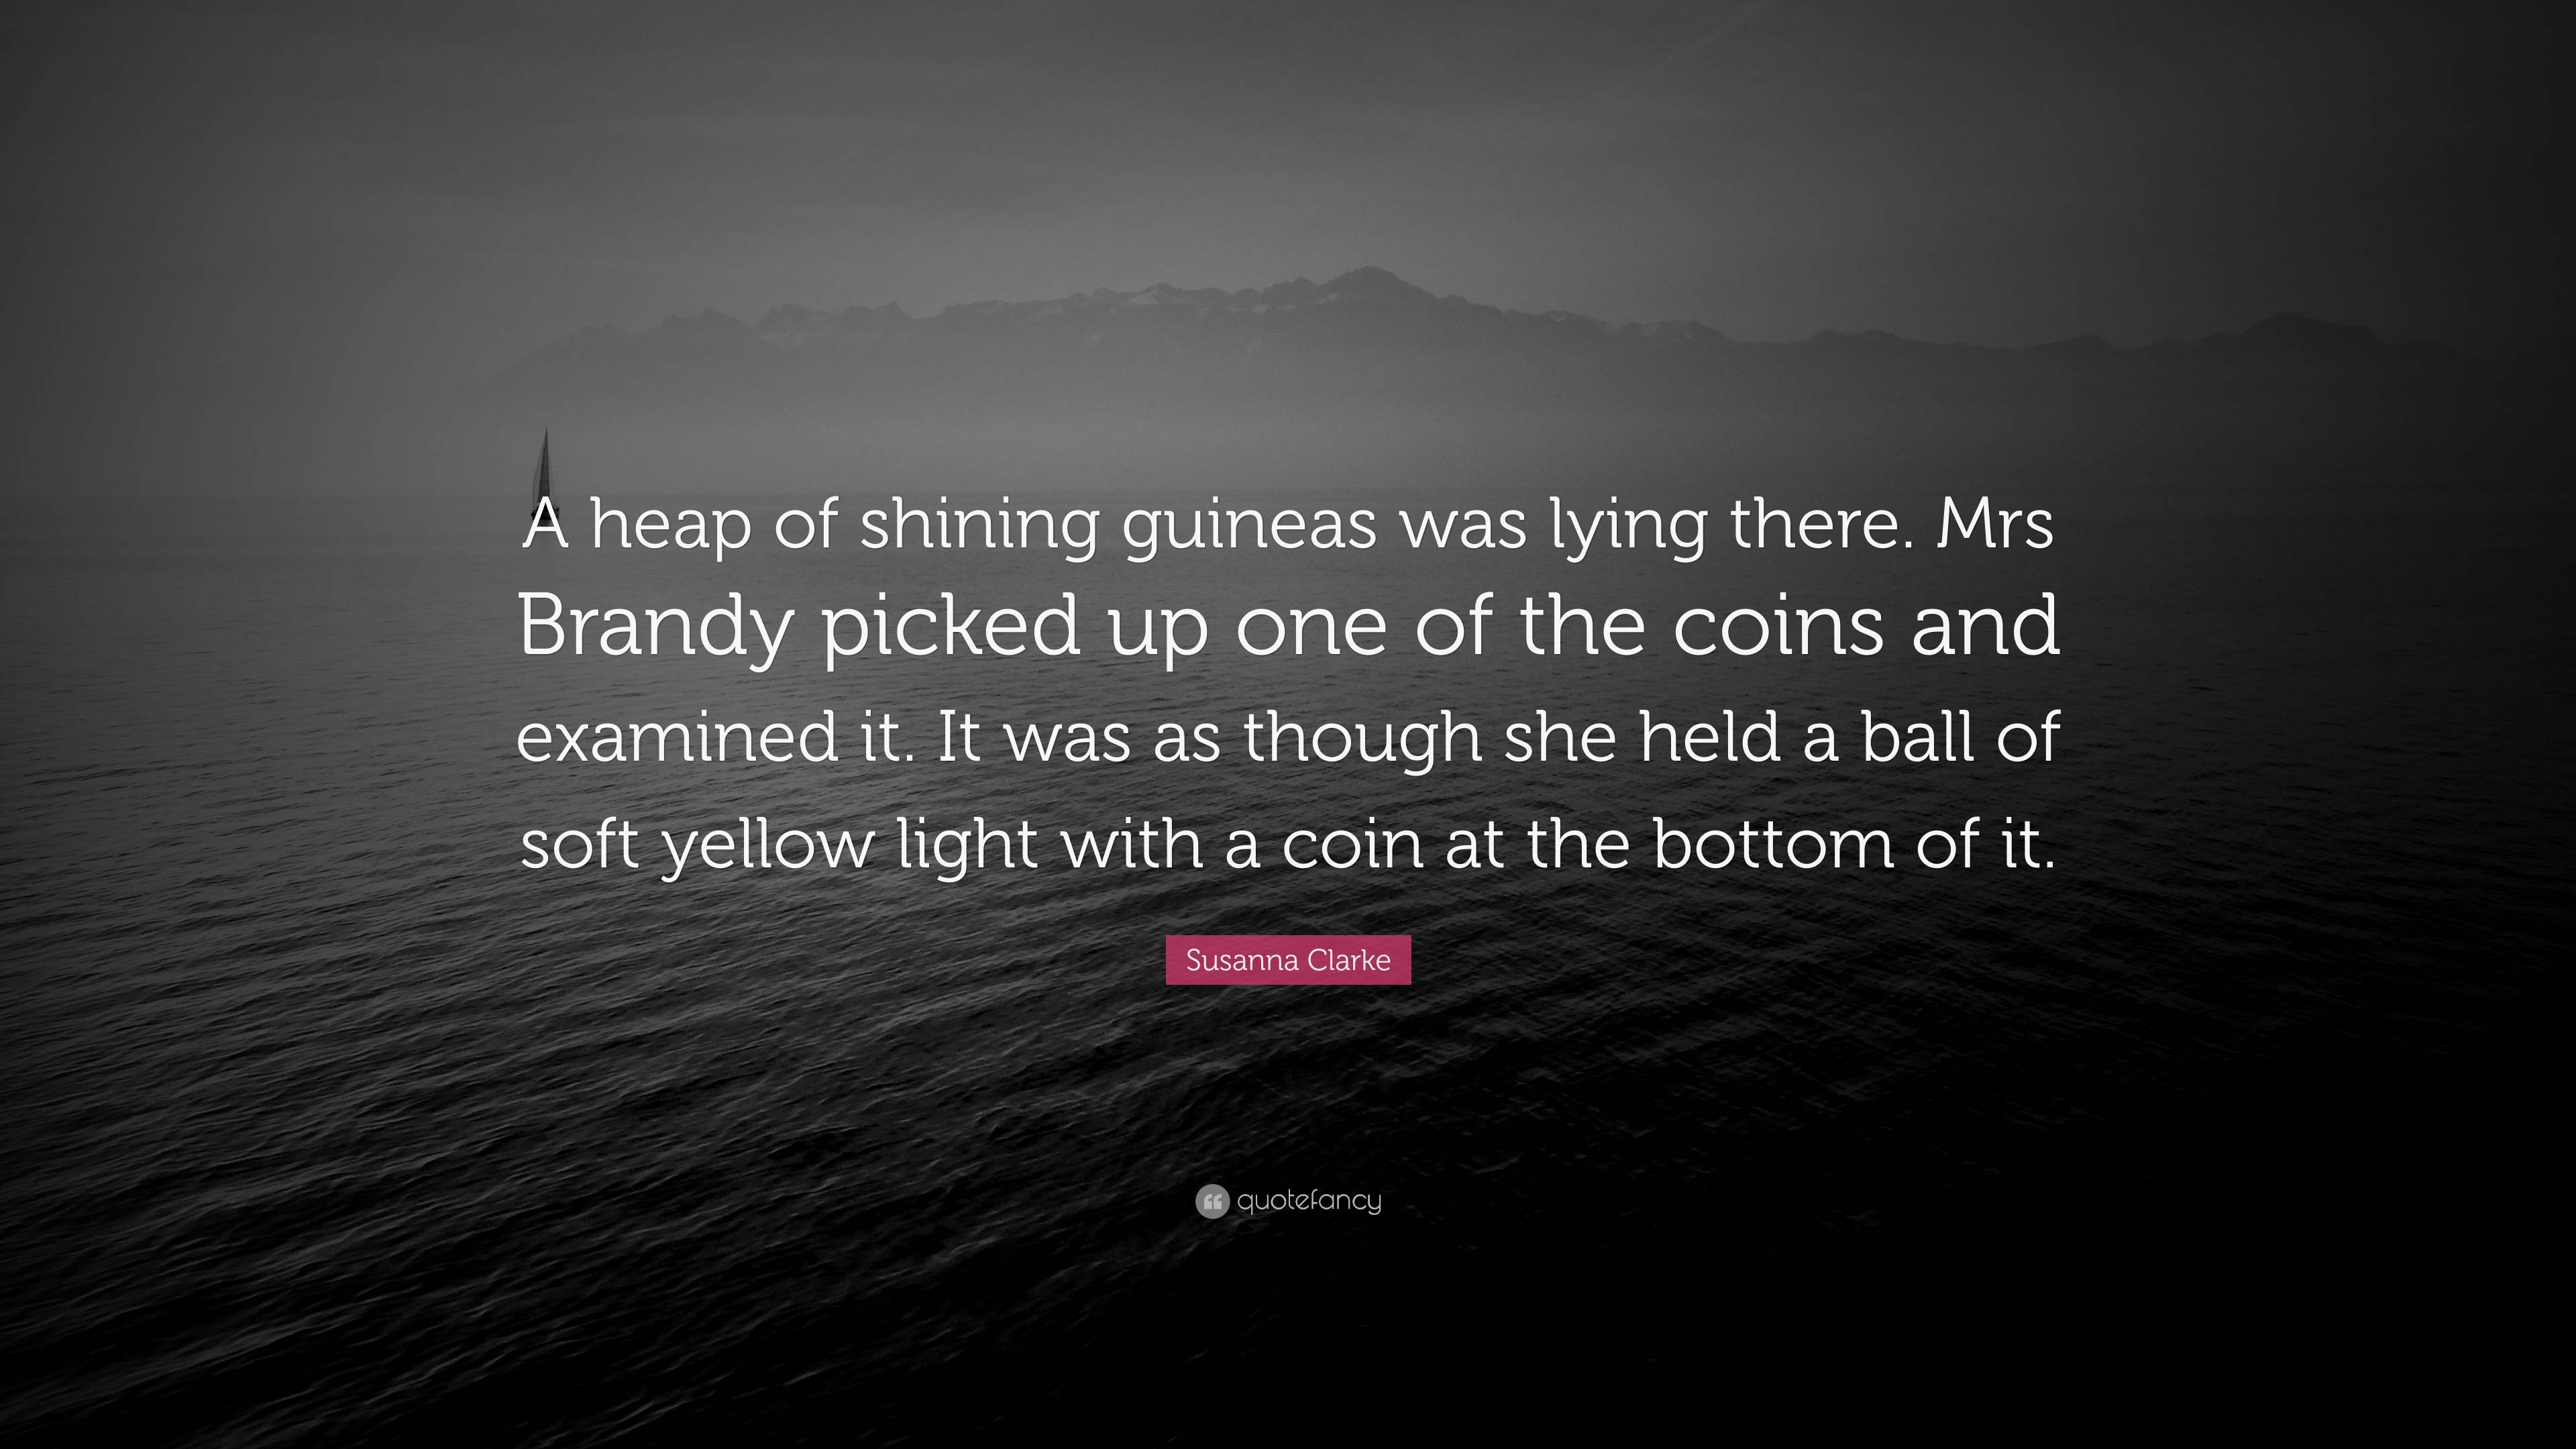 Susanna Clarke Quote: “A heap of shining guineas was lying there. Mrs ...